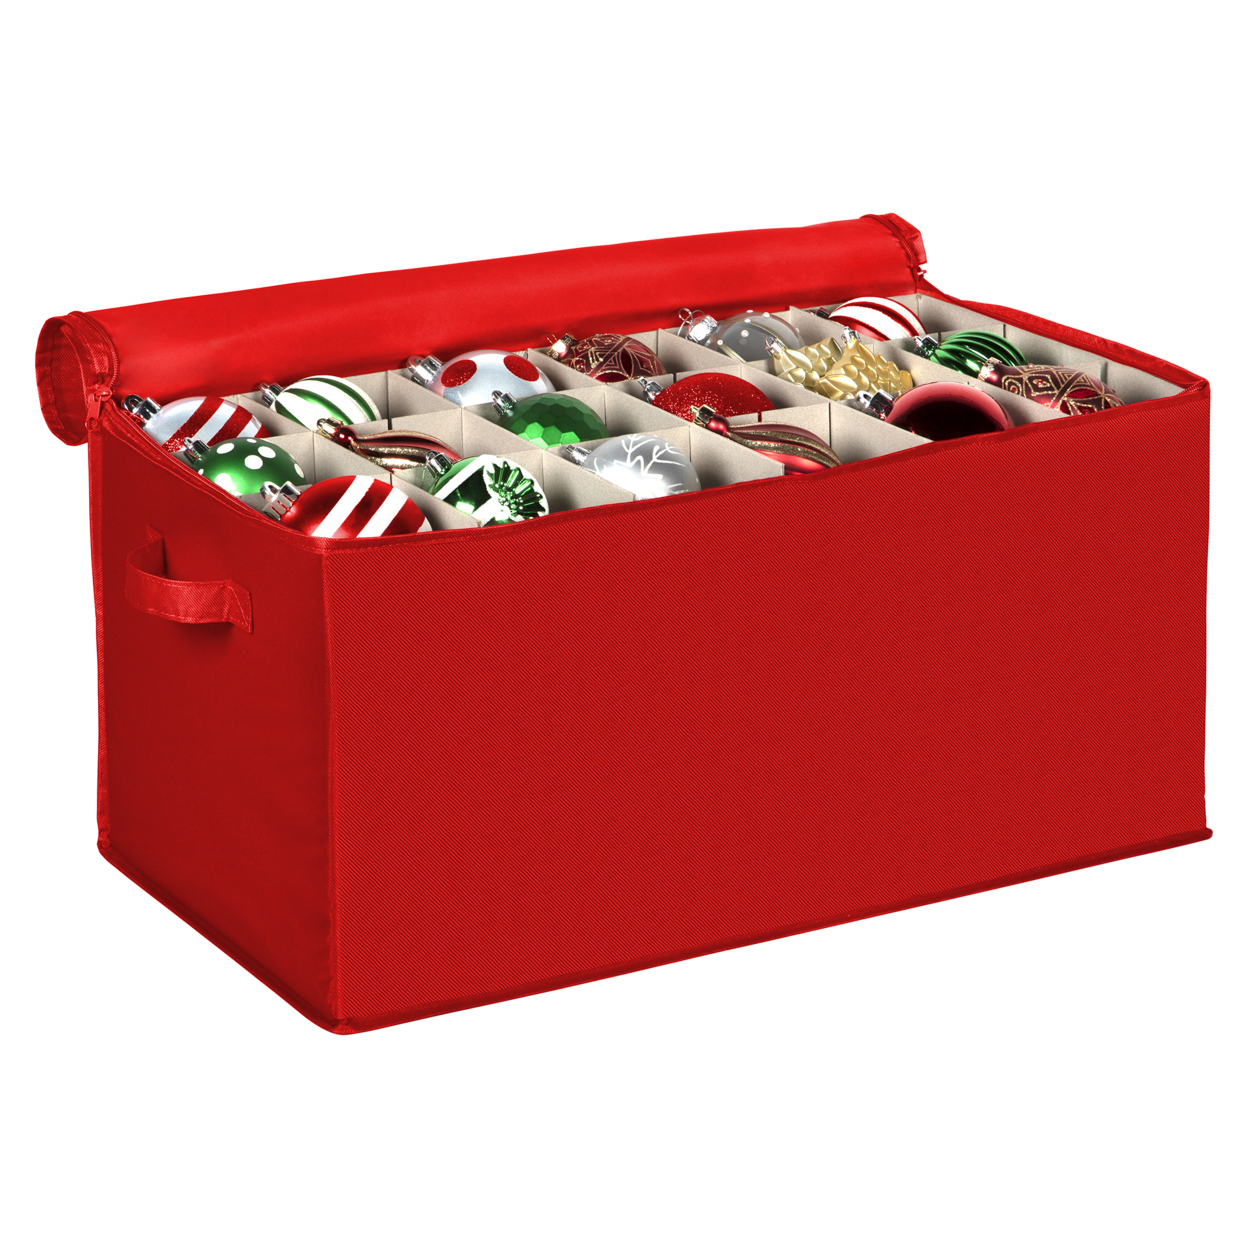 Xmas Ornament Storage Container With Dividers Fits Up To 54 - 4 Ornaments, Durable 600D, Red